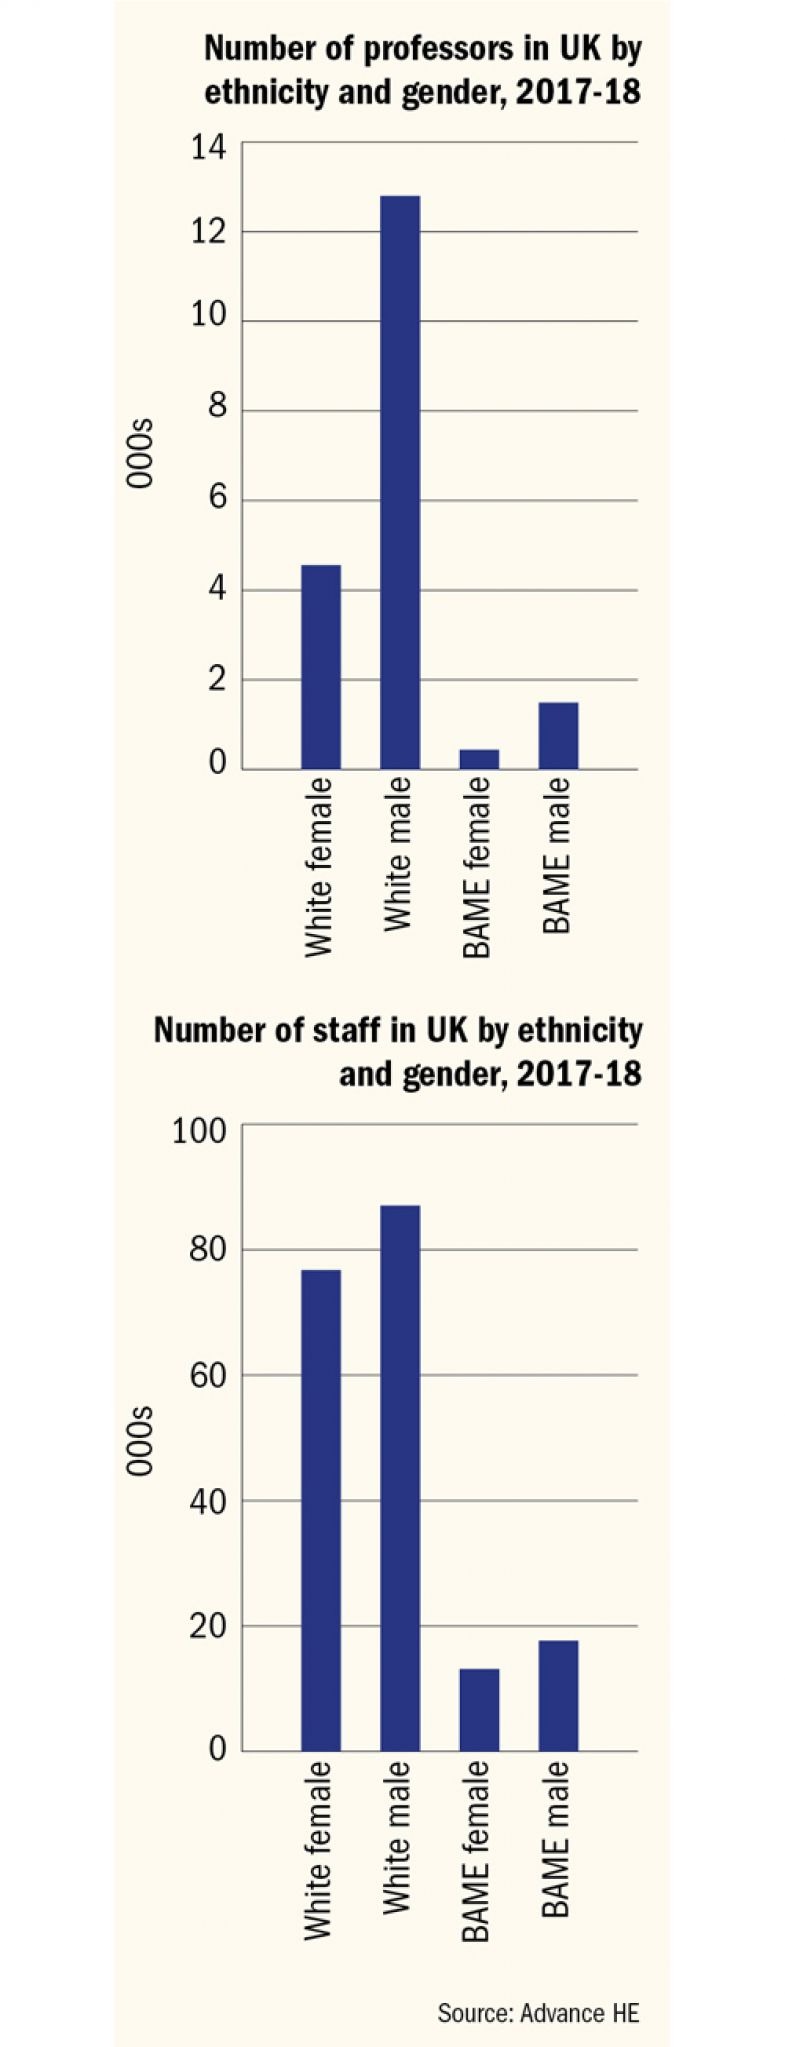 Number of professors and staff in UK by ethnicity and gender, 2017-18